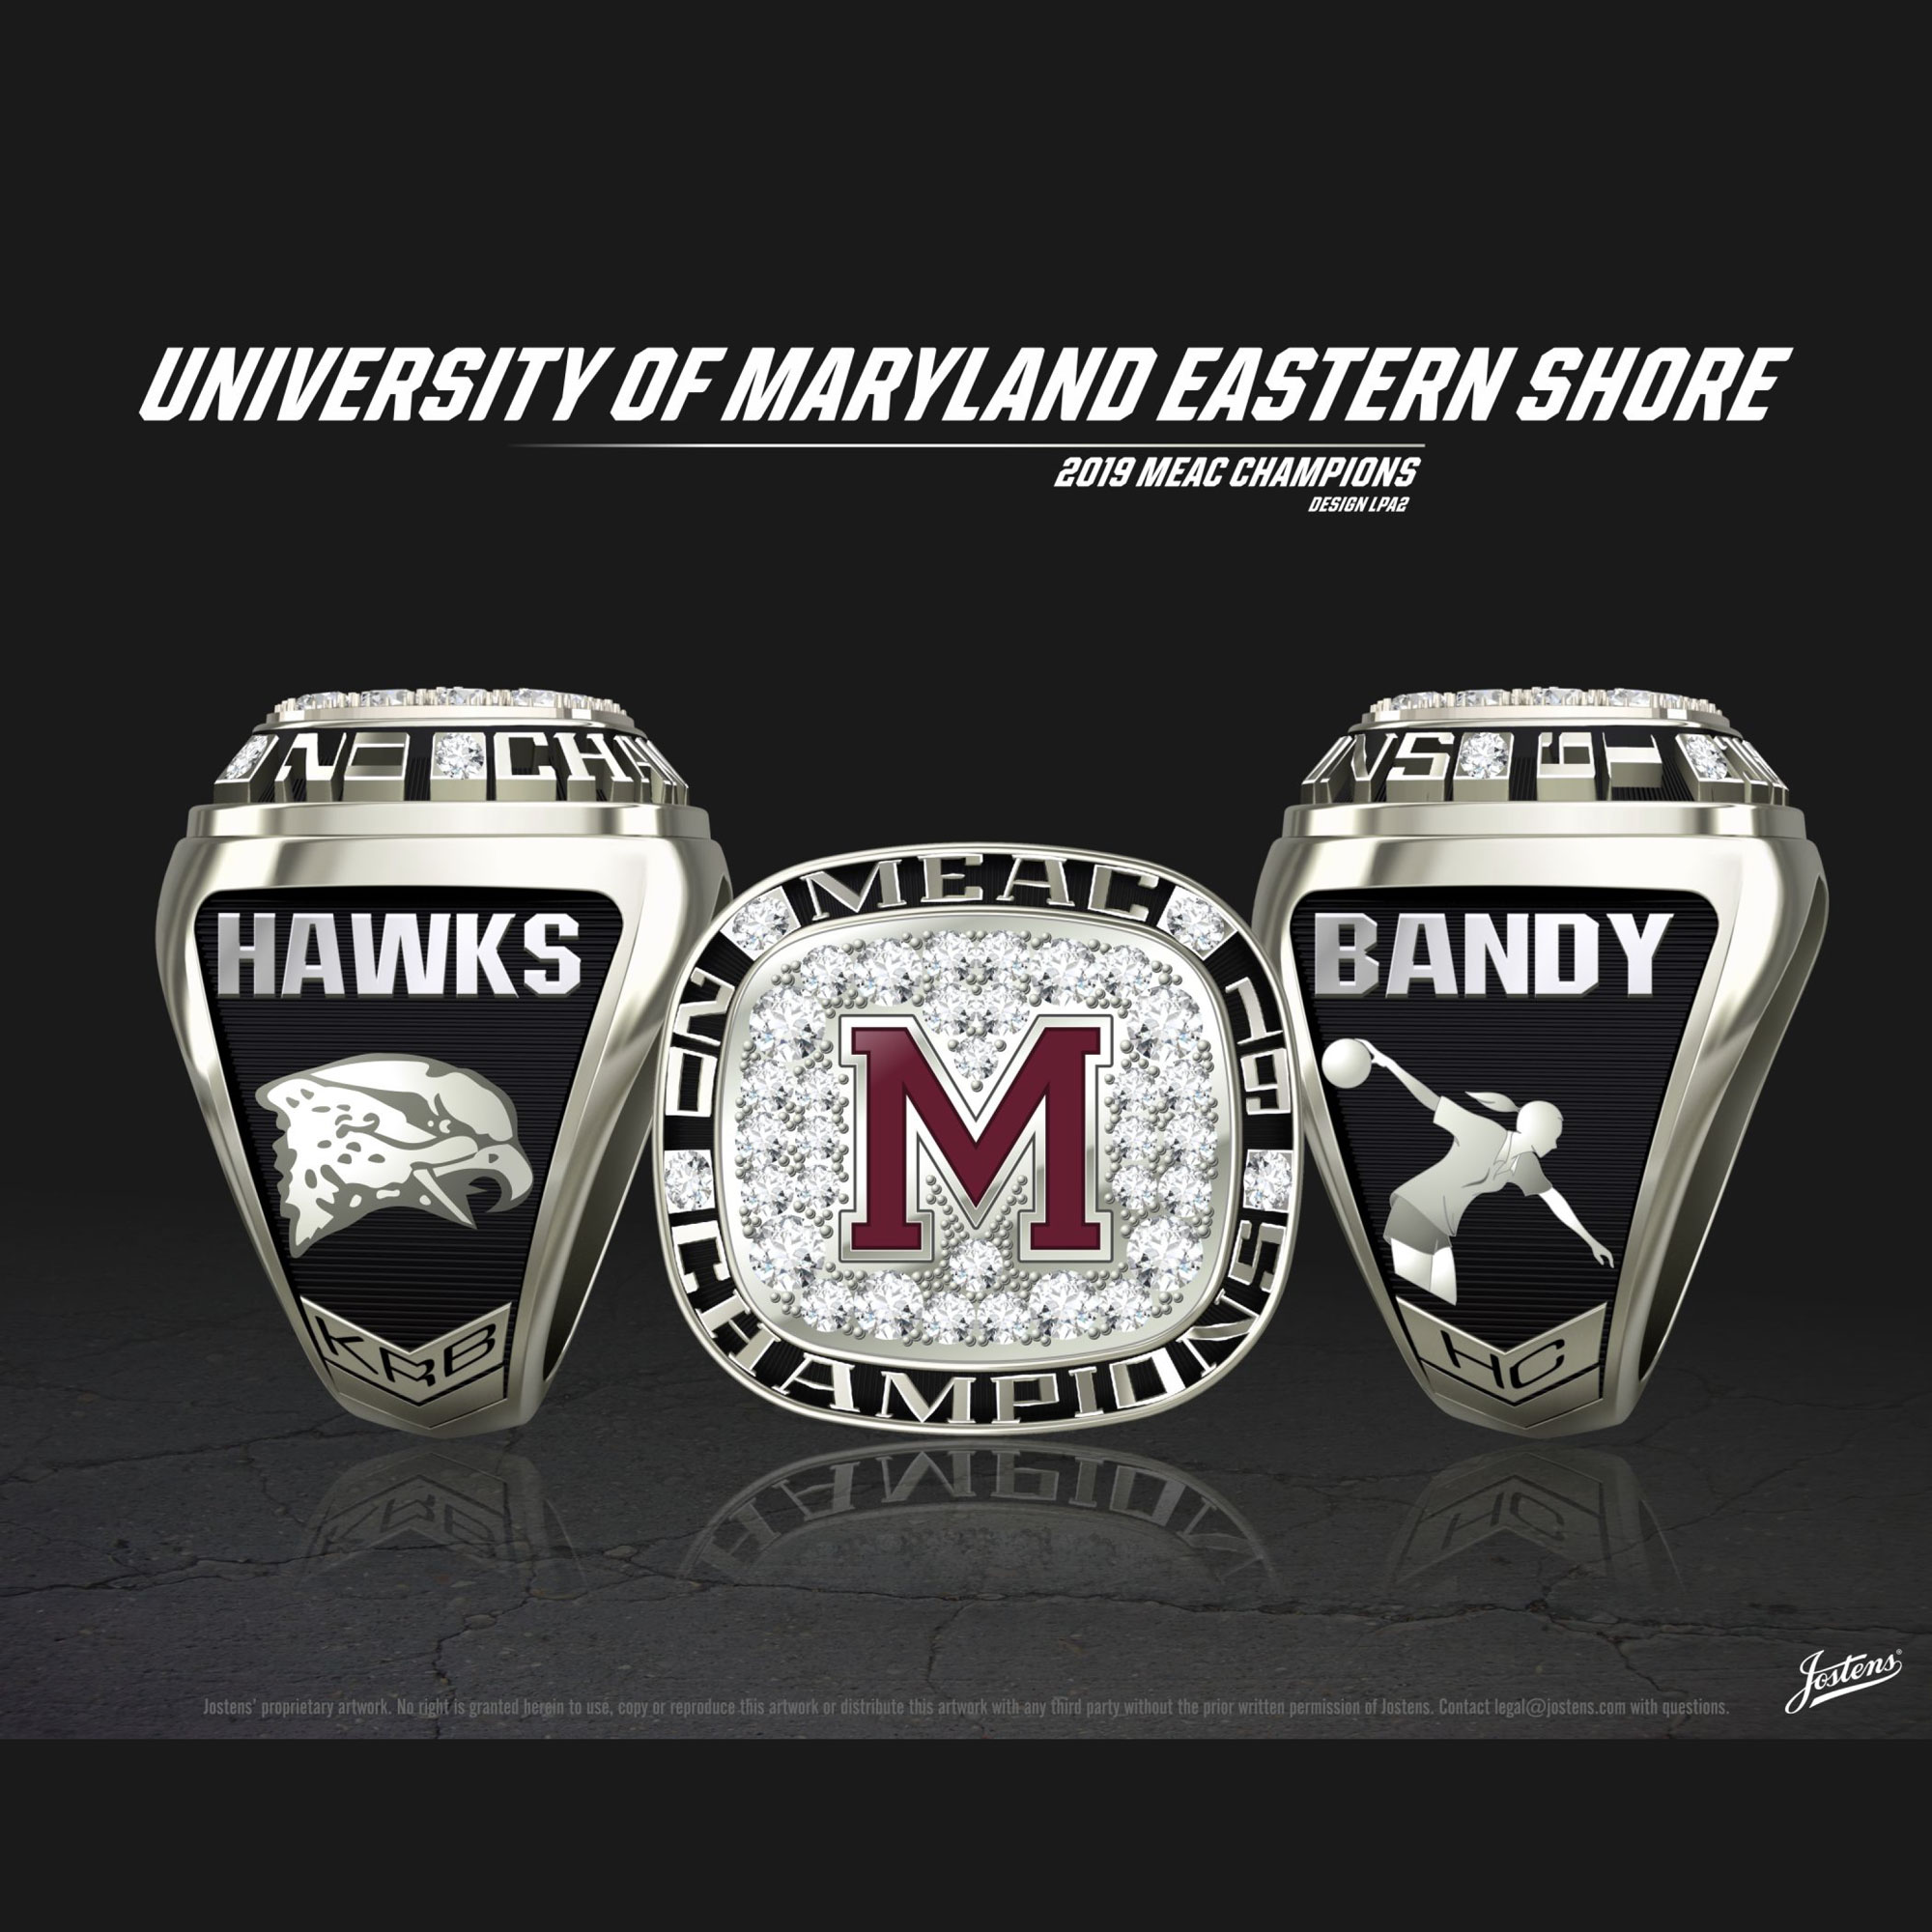 University of Maryland Eastern Shore Women's Bowling 2019 MEAC Championship Ring